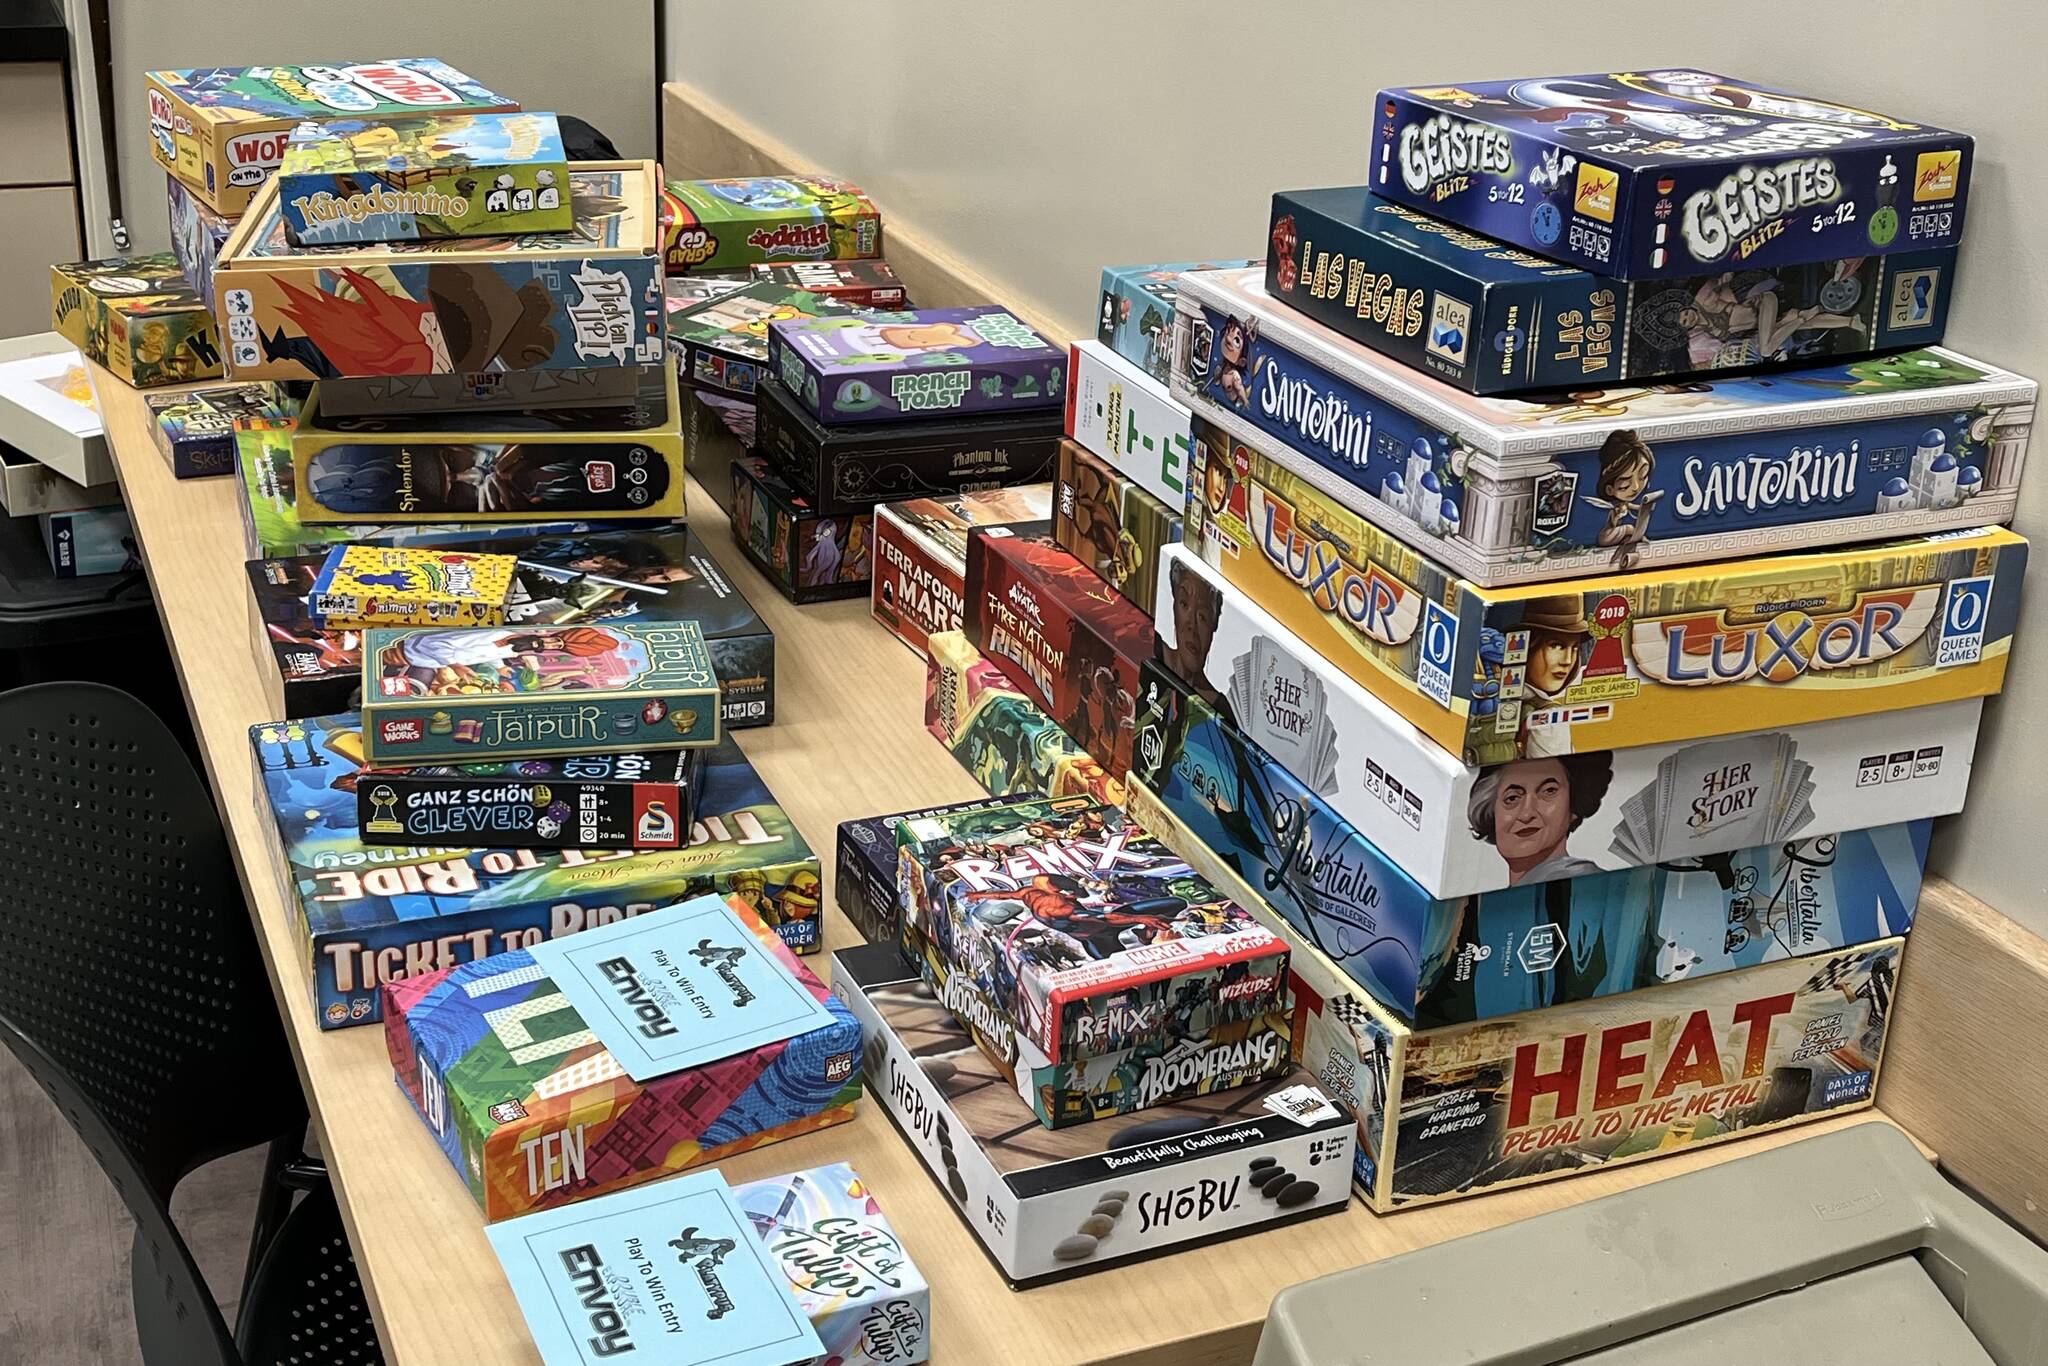 Juneau residents choose from a wide variety of games, seen here, on Saturday during Platypus Gaming’s mini-convention at Juneau Public Libraries over the weekend. (Jonson Kuhn / Juneau Empire)